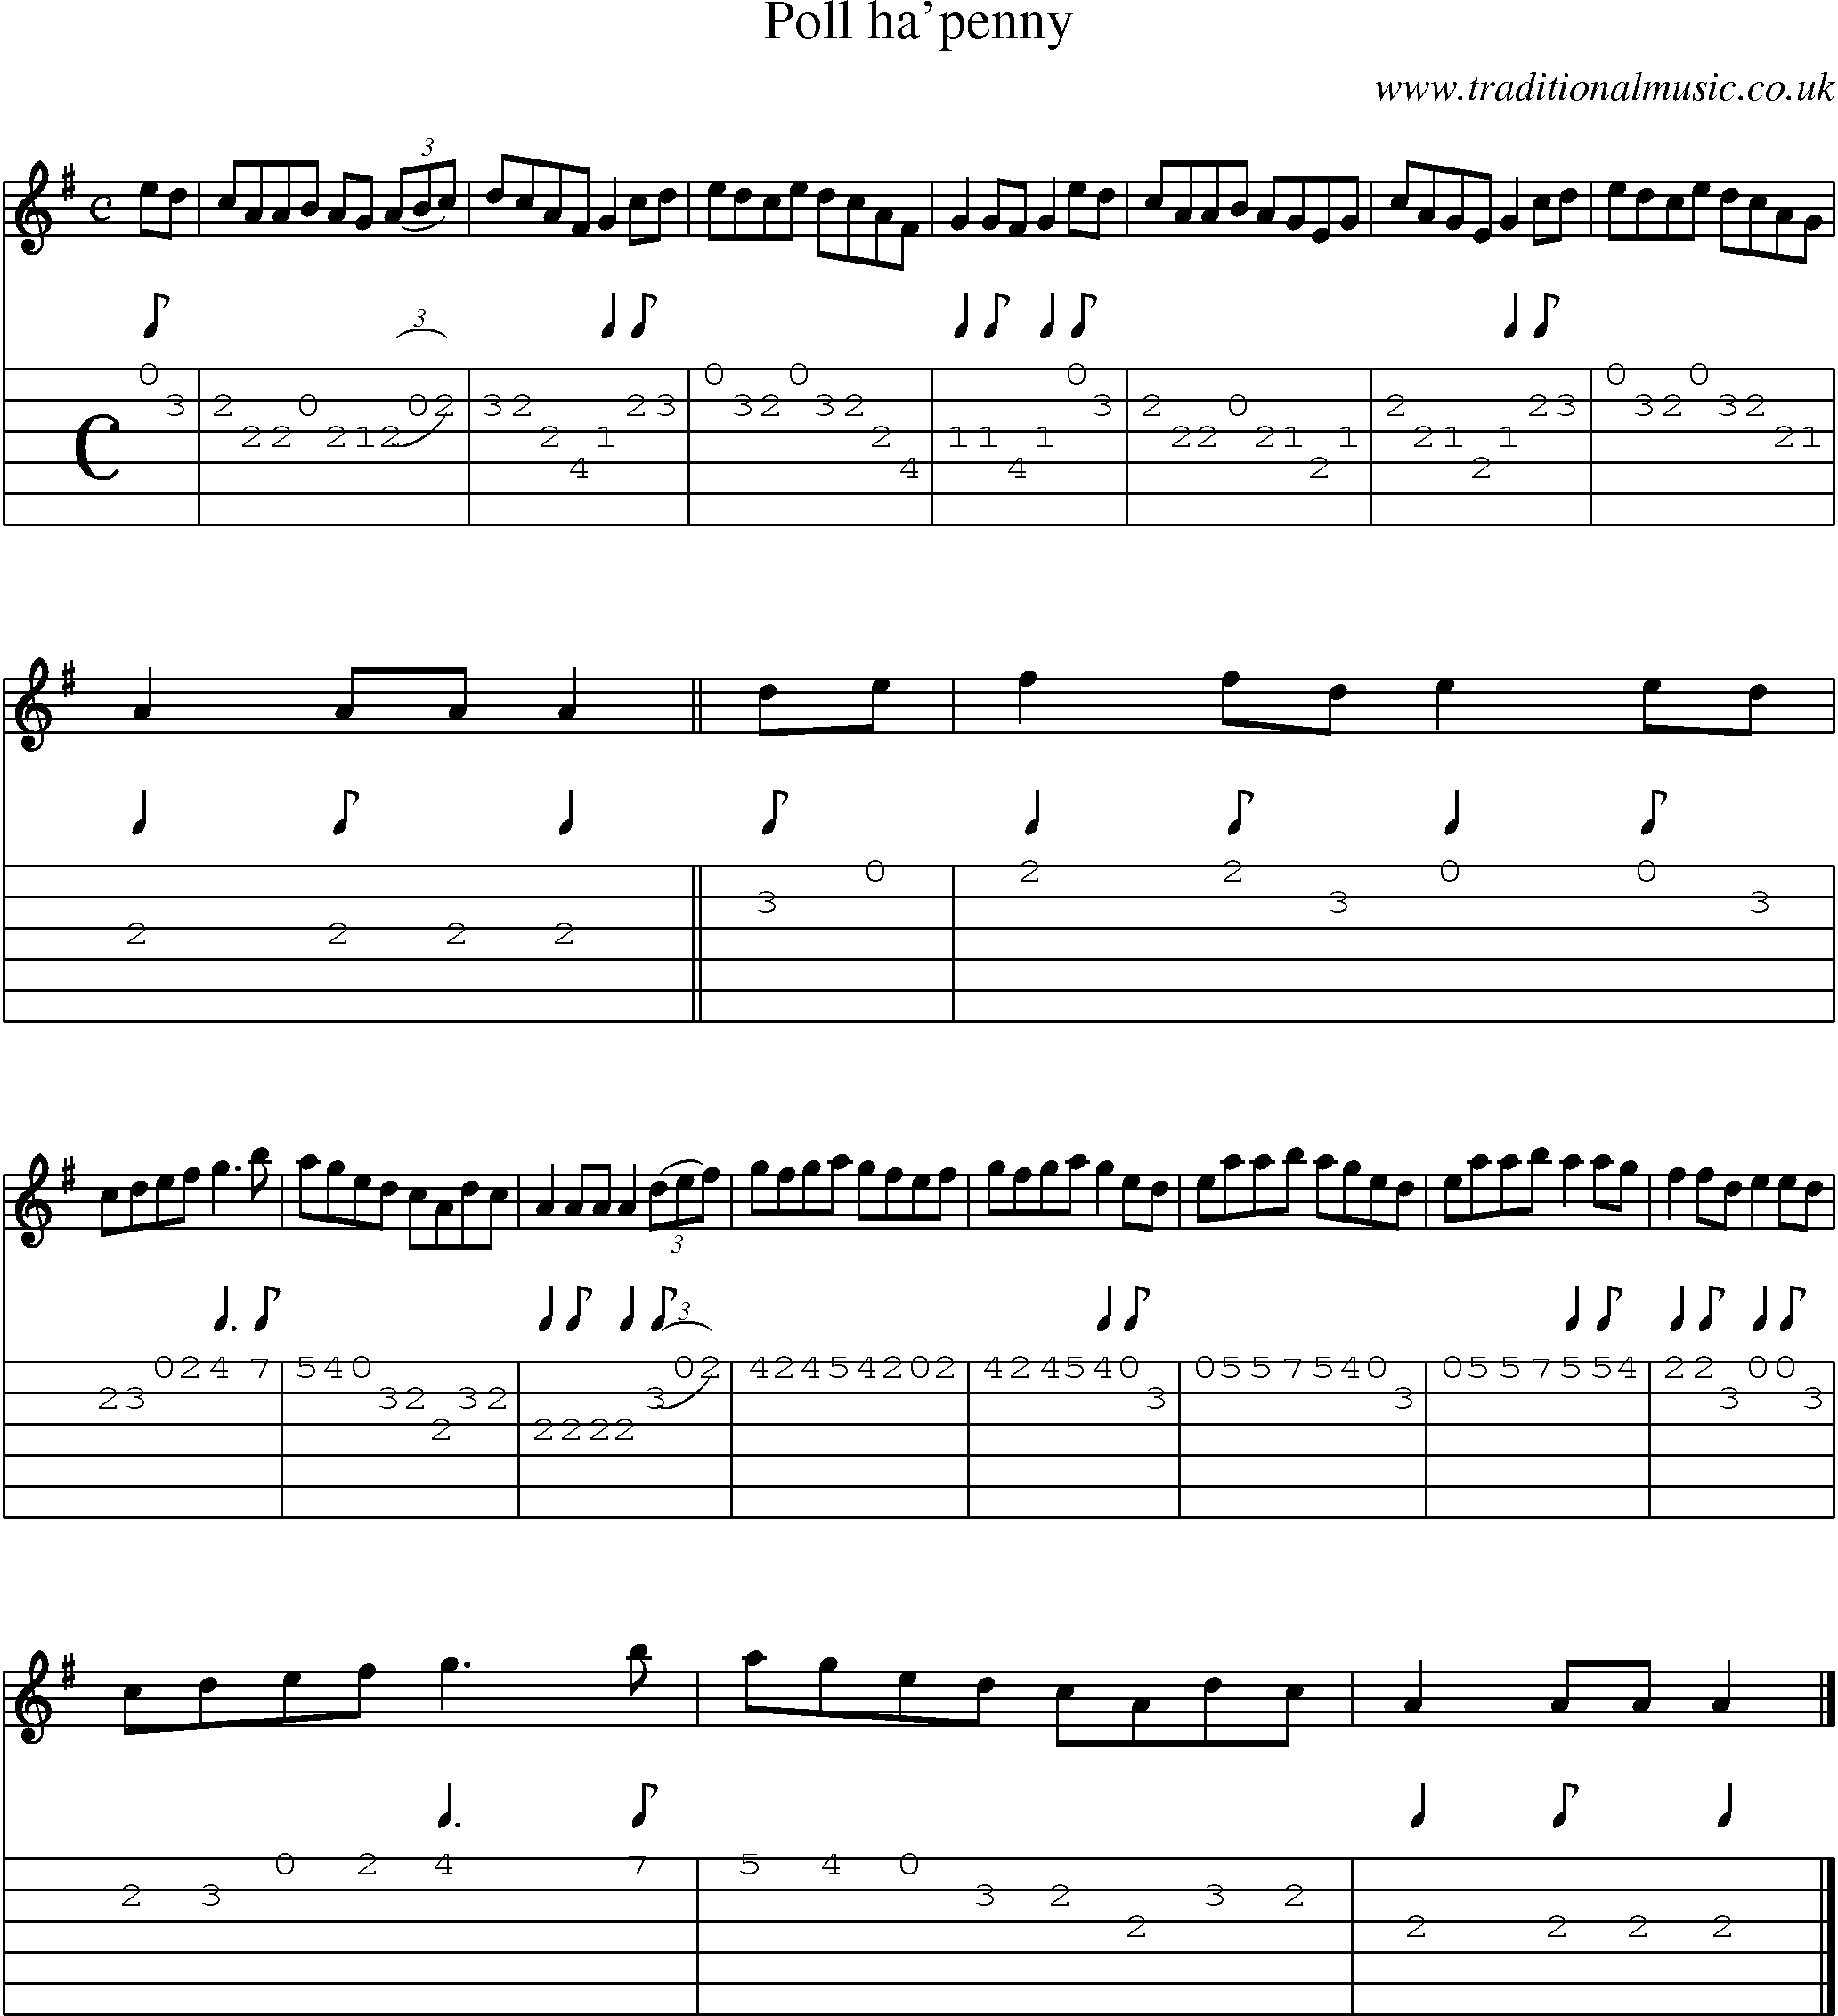 Music Score and Guitar Tabs for Poll Hapenny